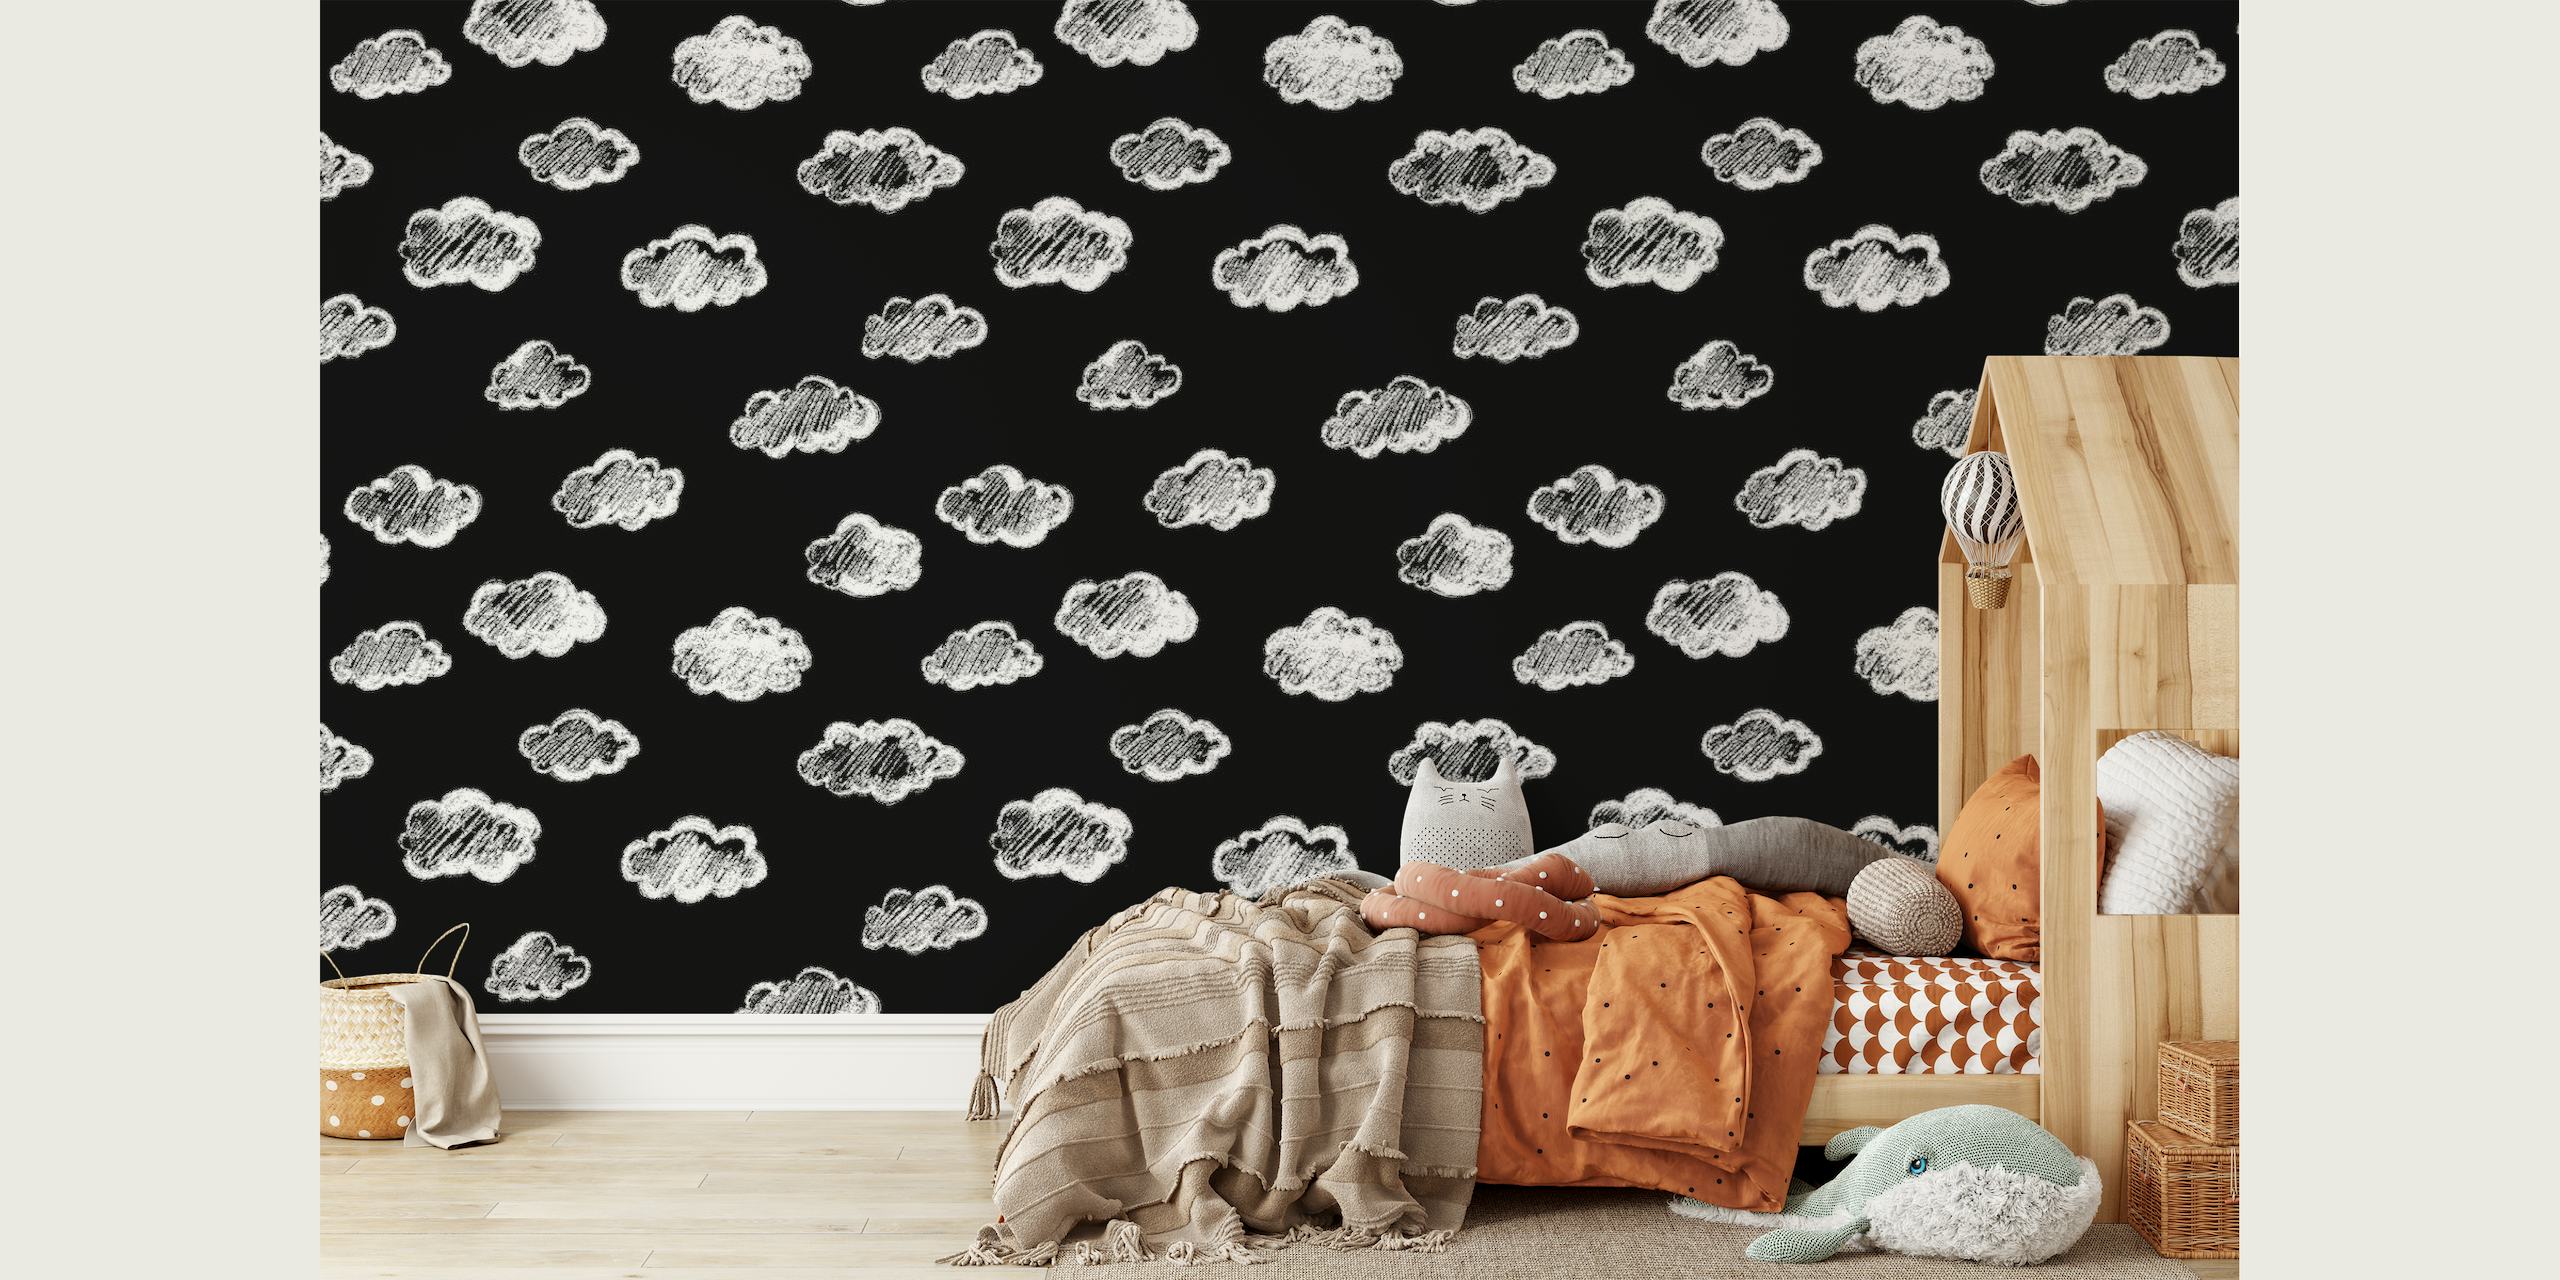 Artistic black wall mural with white chalk cloud designs from happywall.com